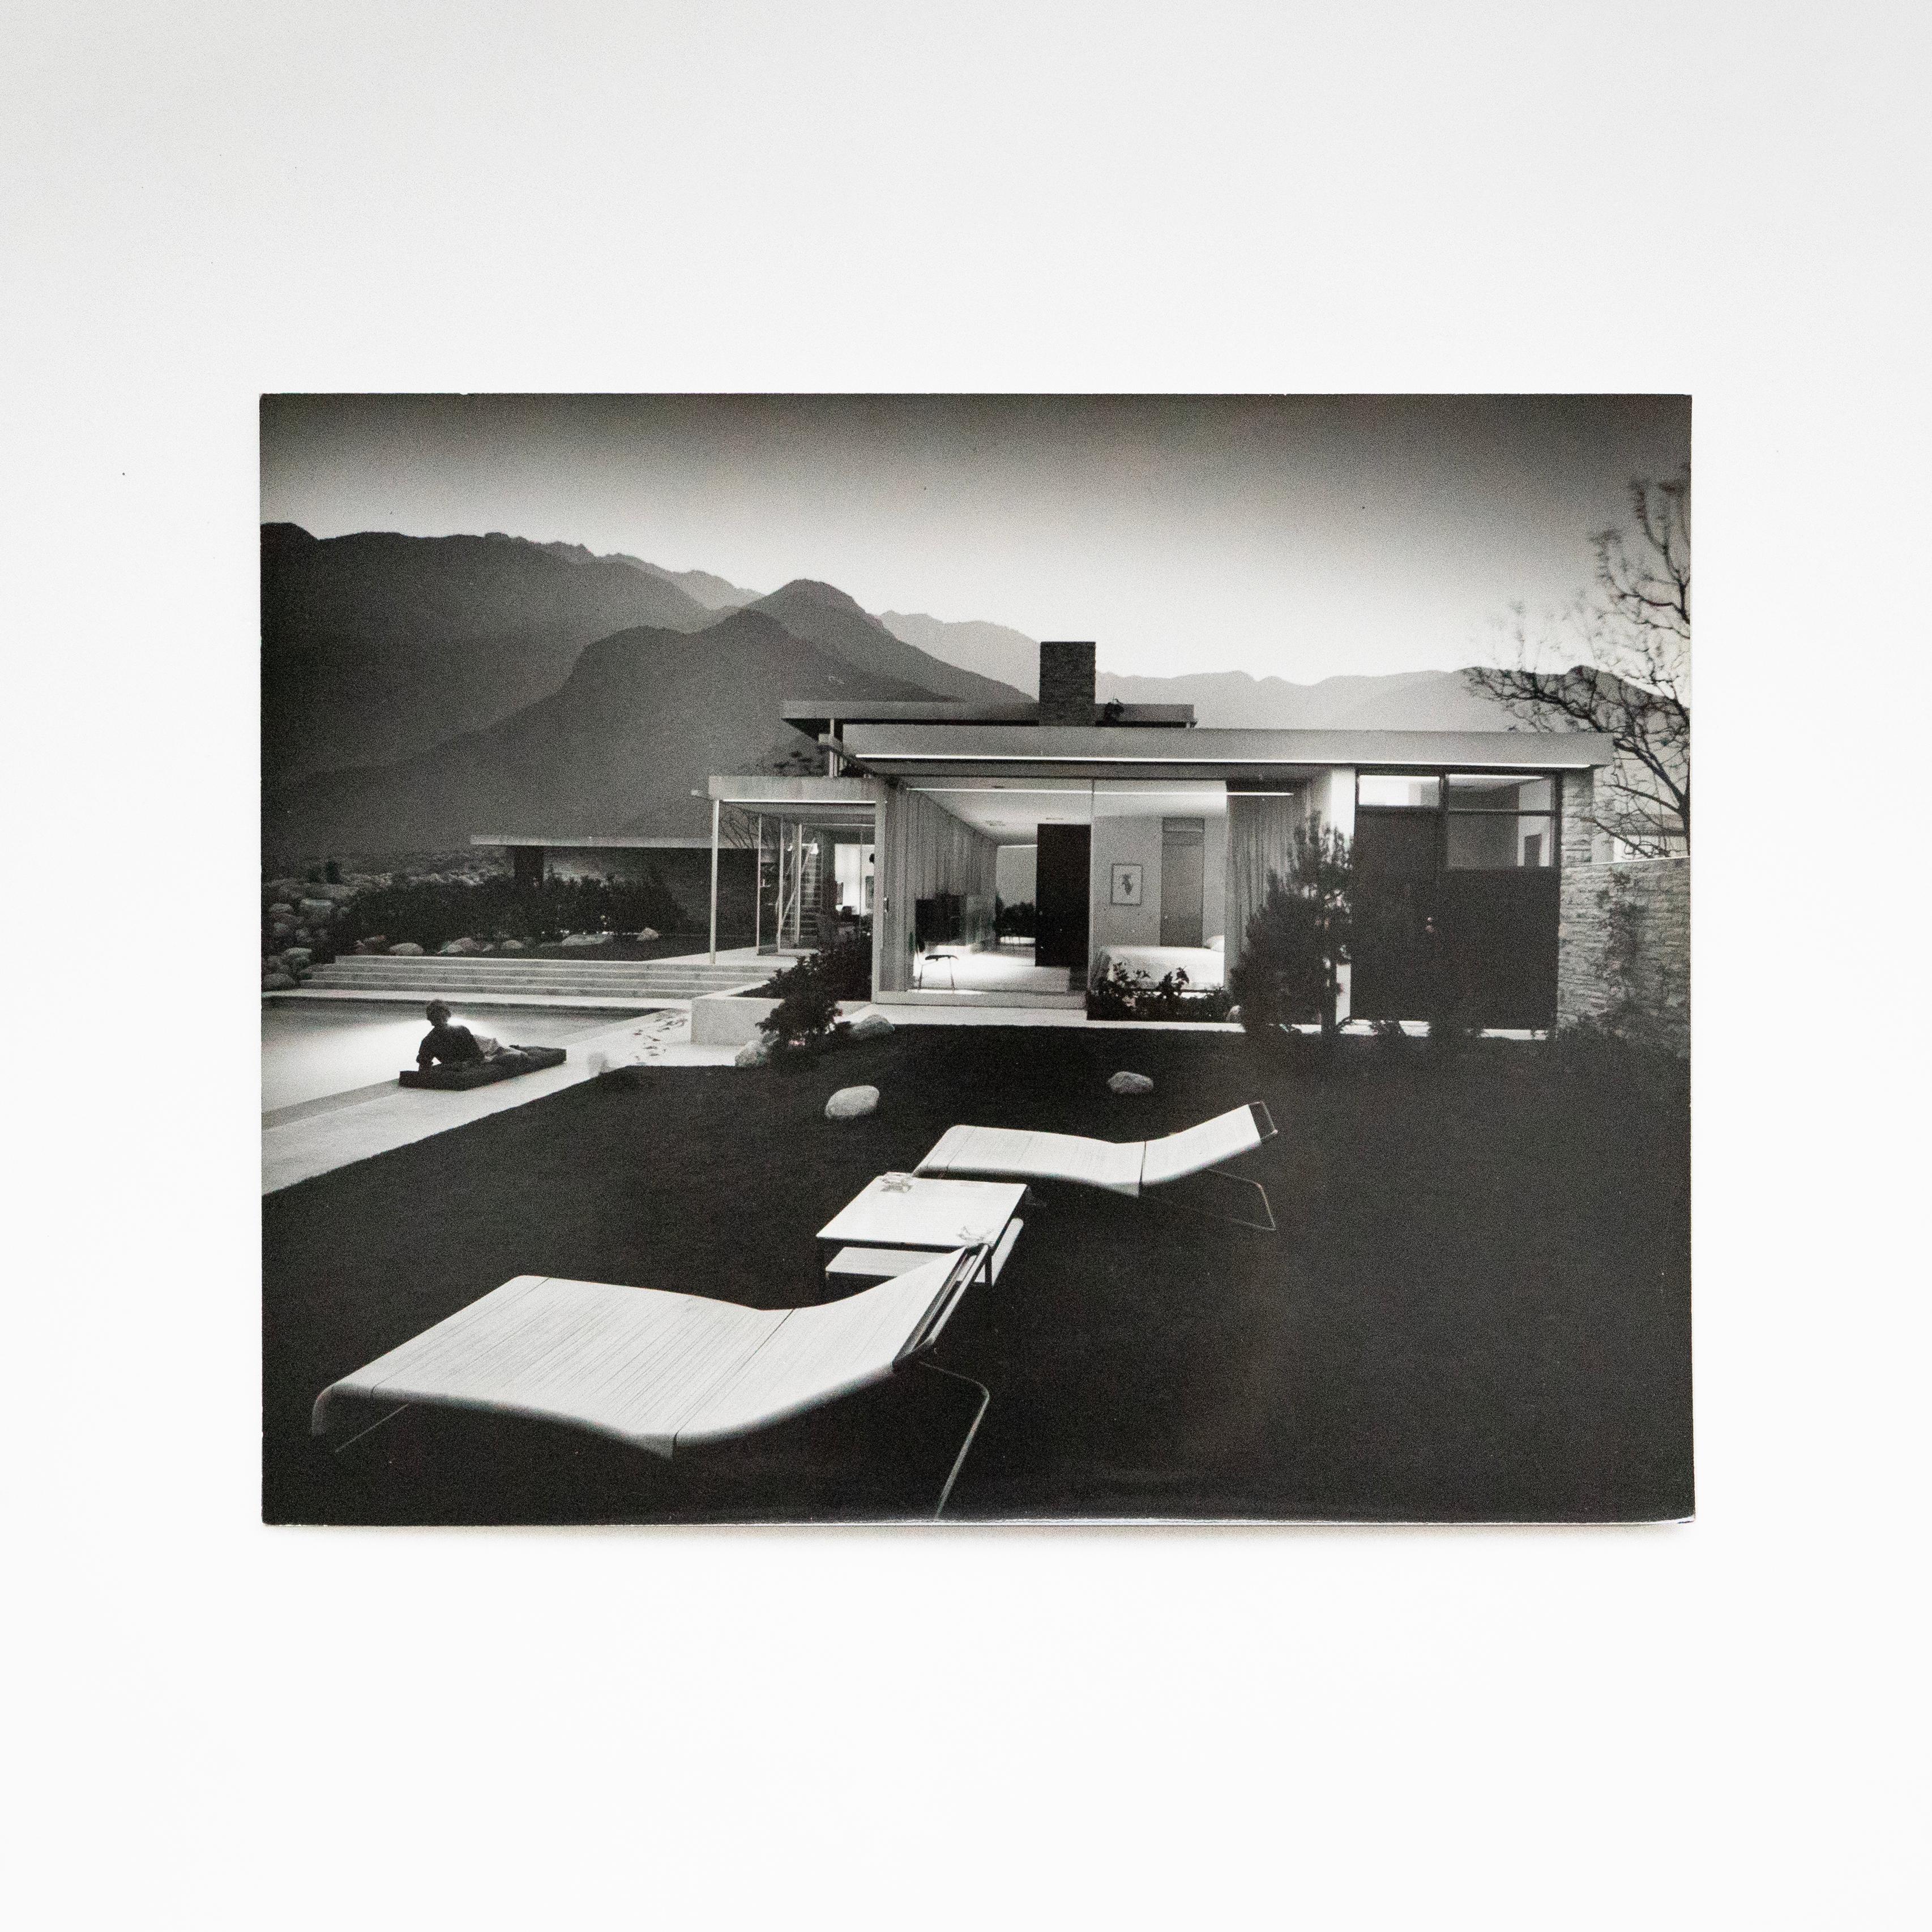 This is Julius Shulman's iconic photograph of the Kaufmann House, designed by Richard Neutra in 1946 and photographed by Shulman in 1947. The house was commissioned by Edgar J. Kaufmann, Sr. who also commissioned Frank Lloyd Wright's Fallingwater.